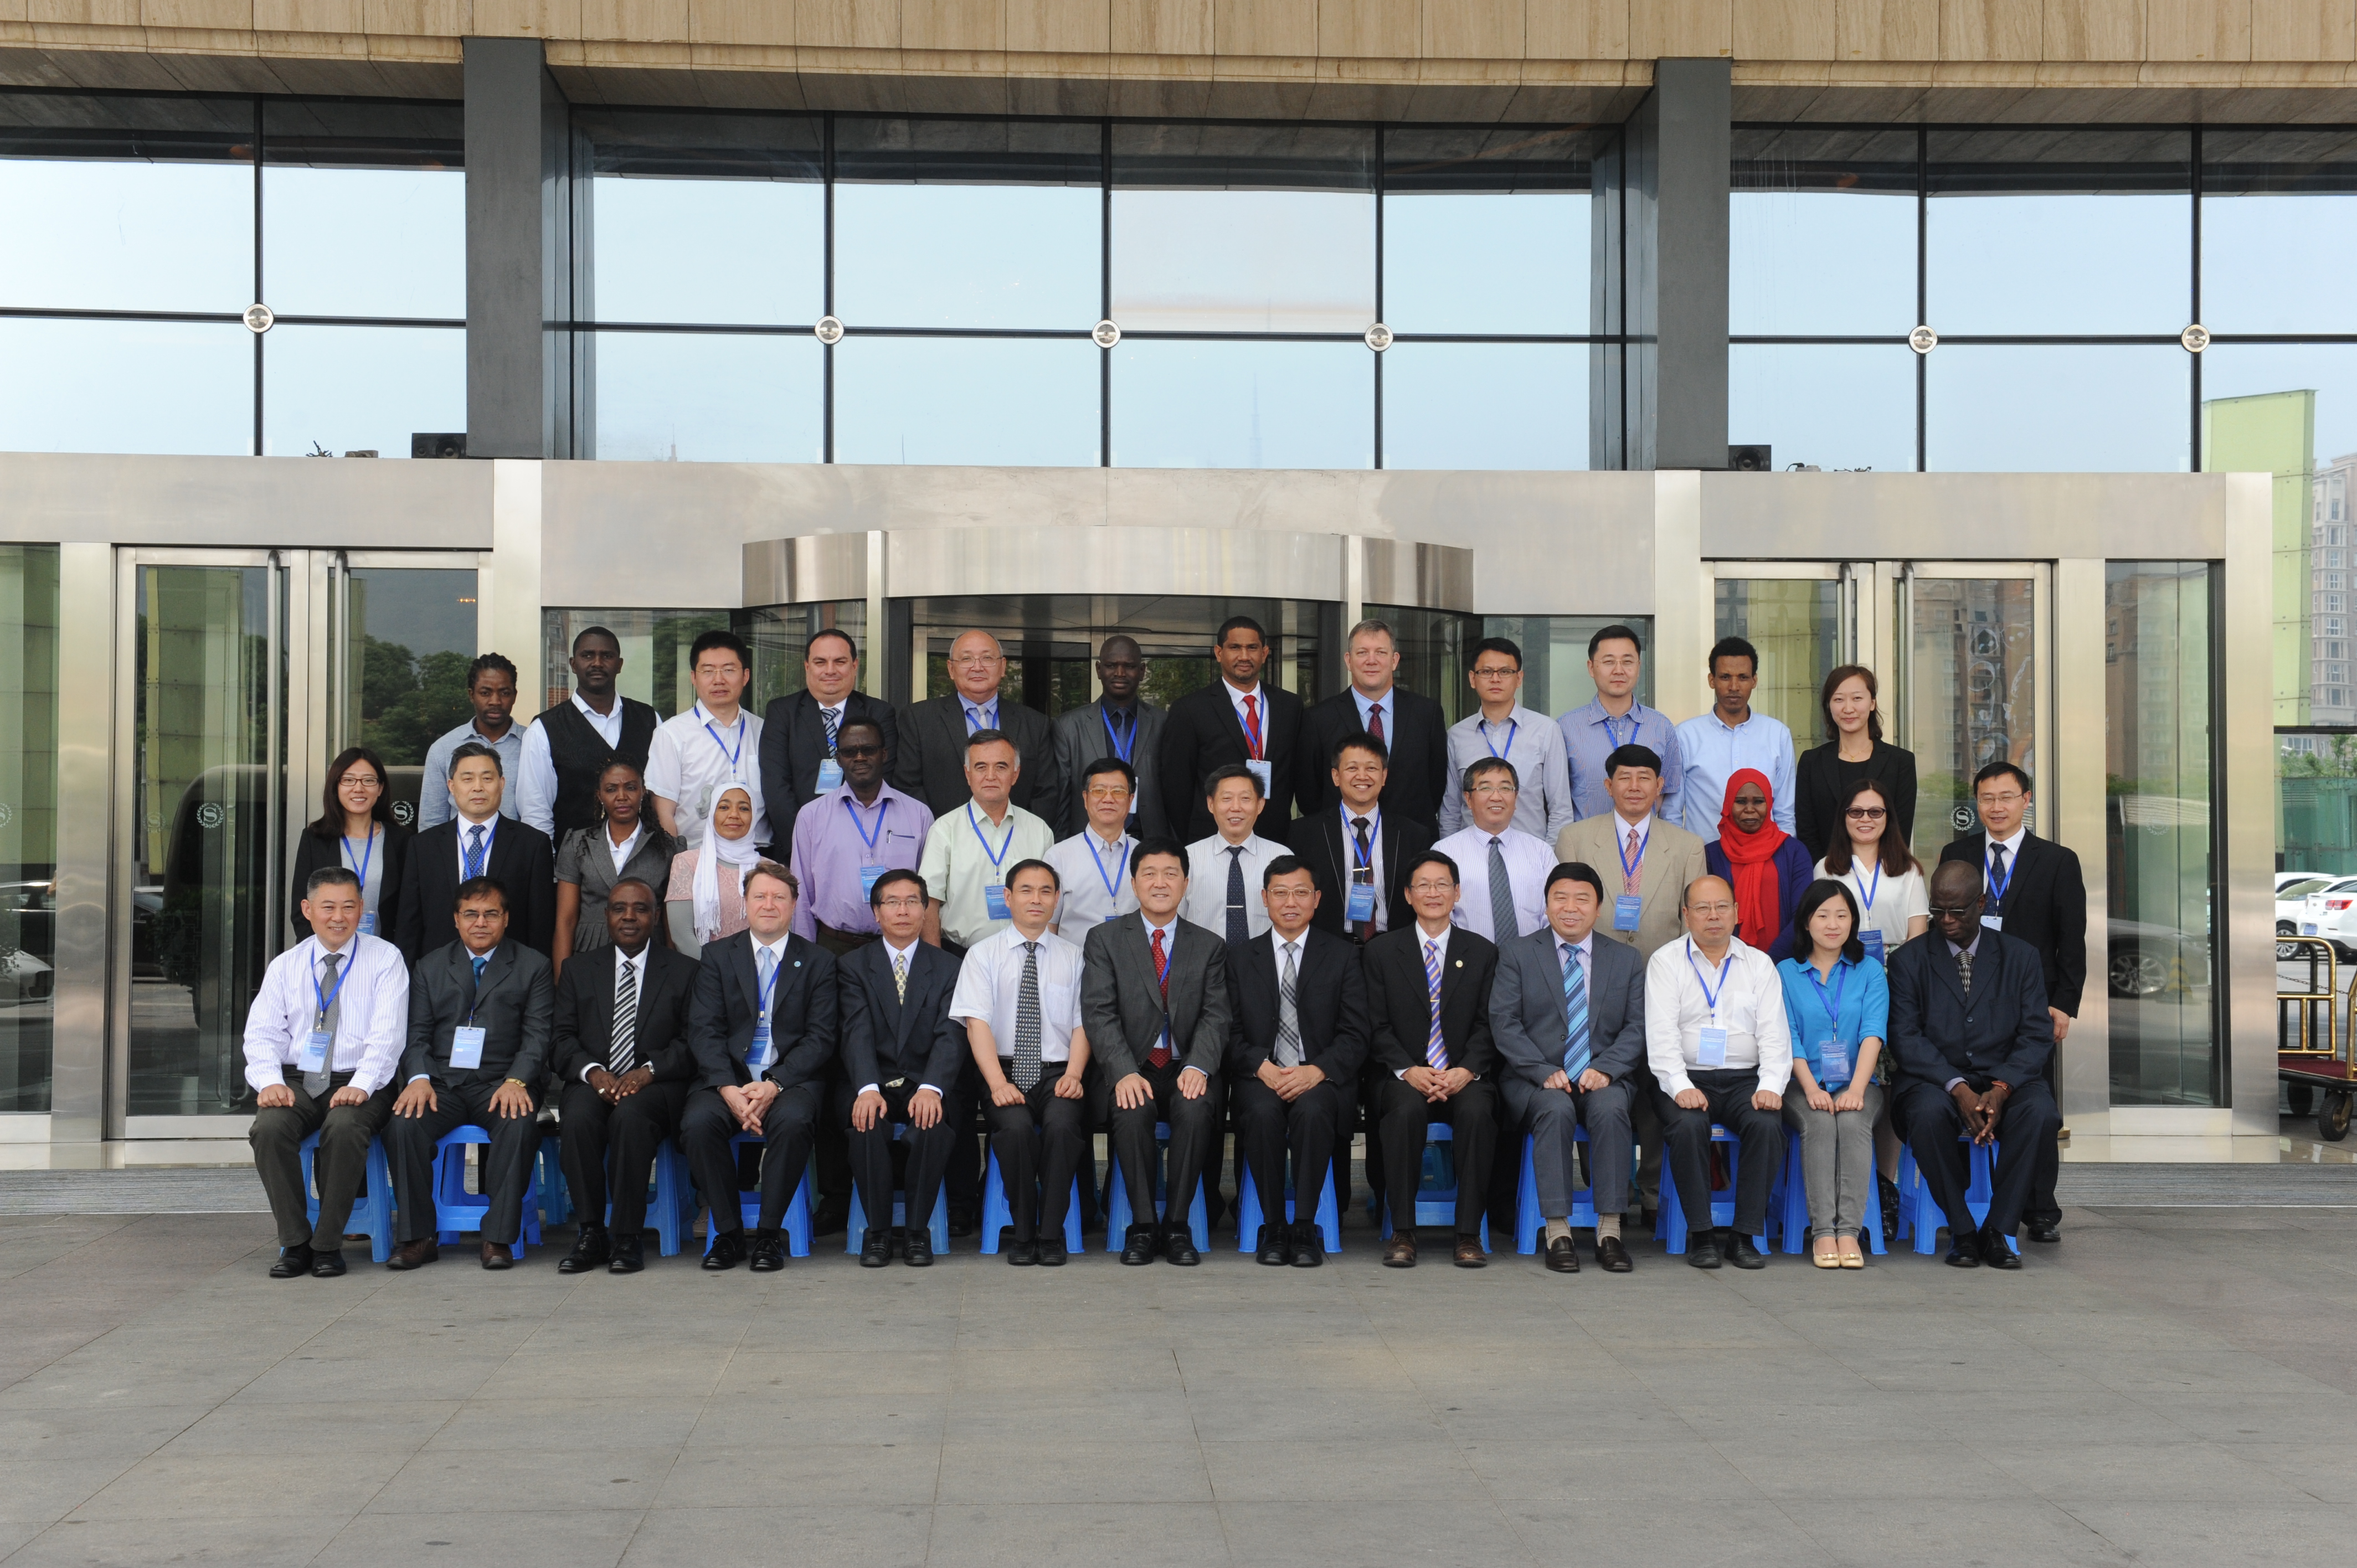 FAO International High-Level Consultative Expert Workshop (HLCEW) on Sustainable Development of Aquaculture and Inland Fisheries under the Framework of the FAO-China South-South Cooperation (SSC) Programme